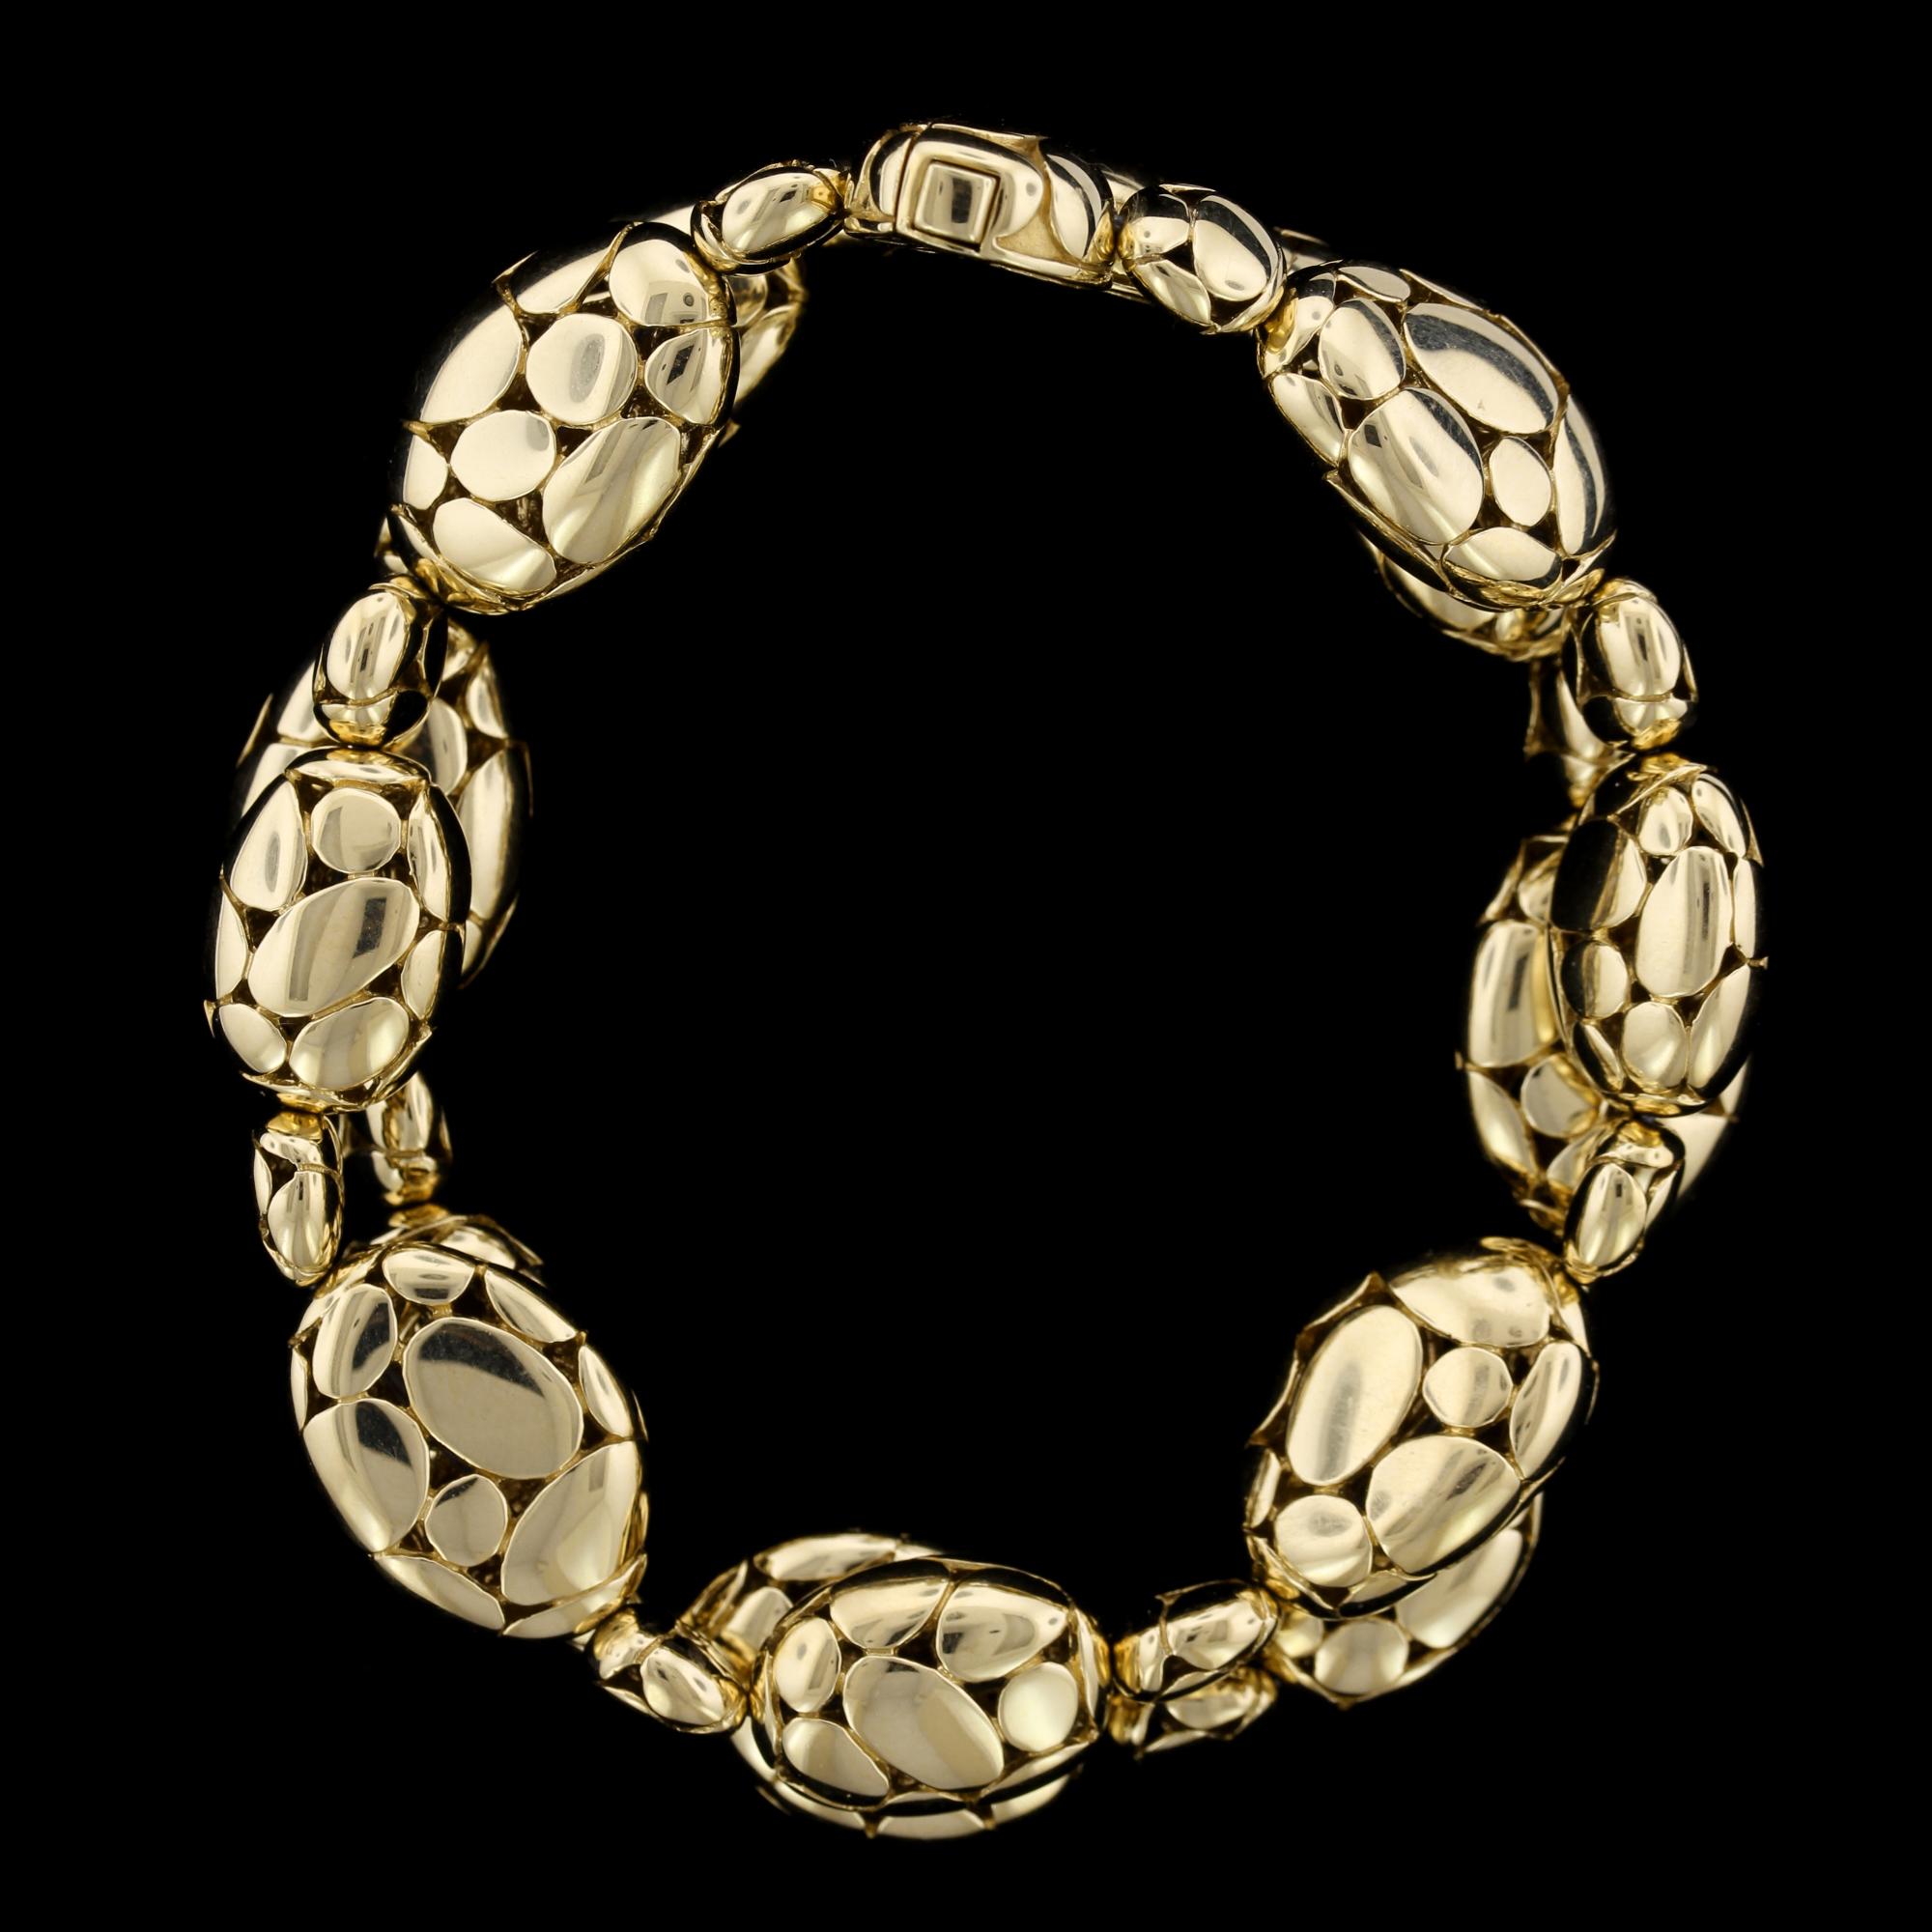 John Hardy 18K Yellow Gold Kali Bead Bracelet. The bracelet is designed with two rows of various sized Kali beads, length 7 3/4